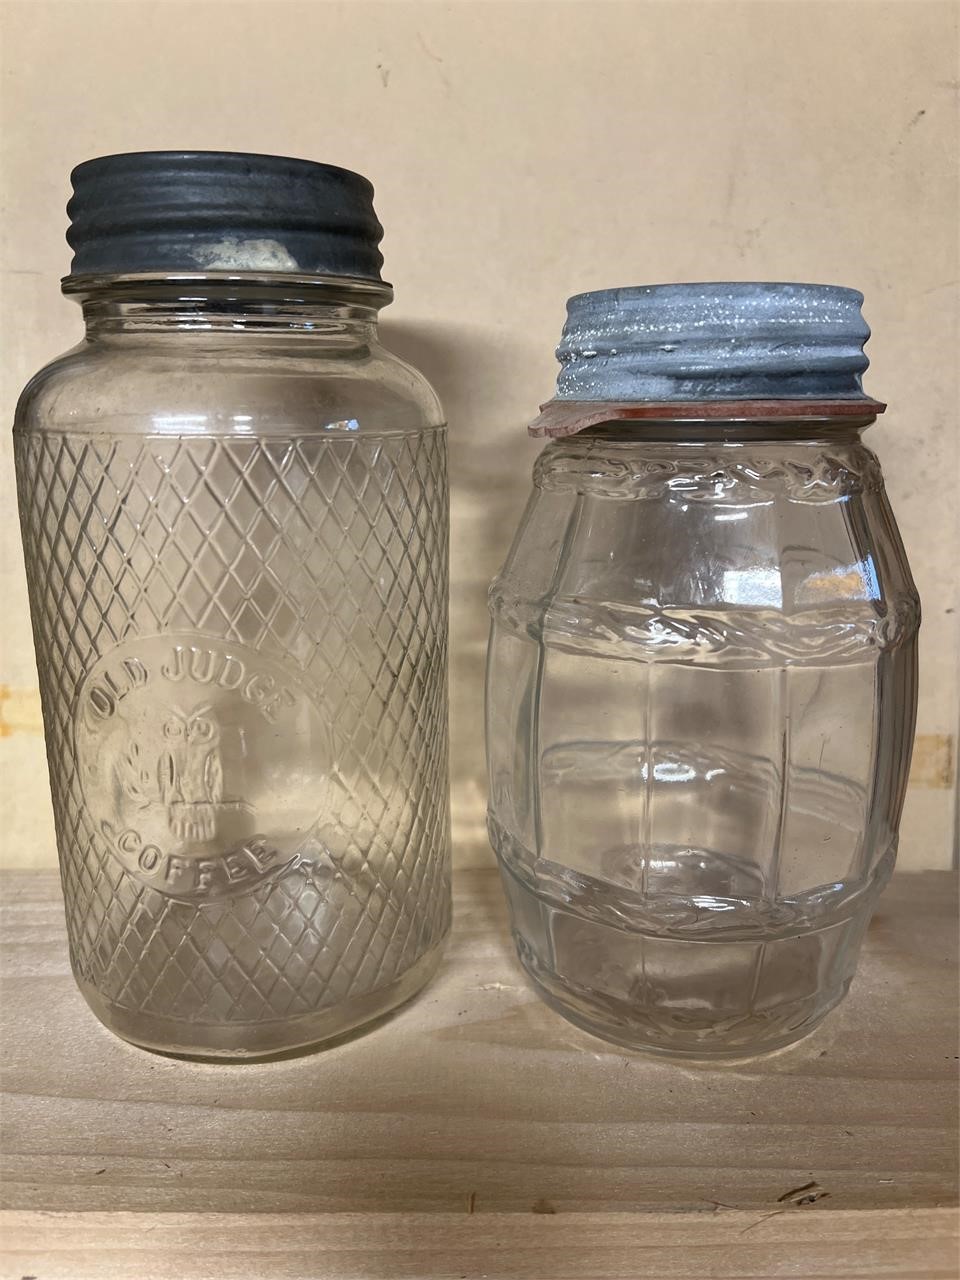 Lot of two products jars, one coffee and barrel